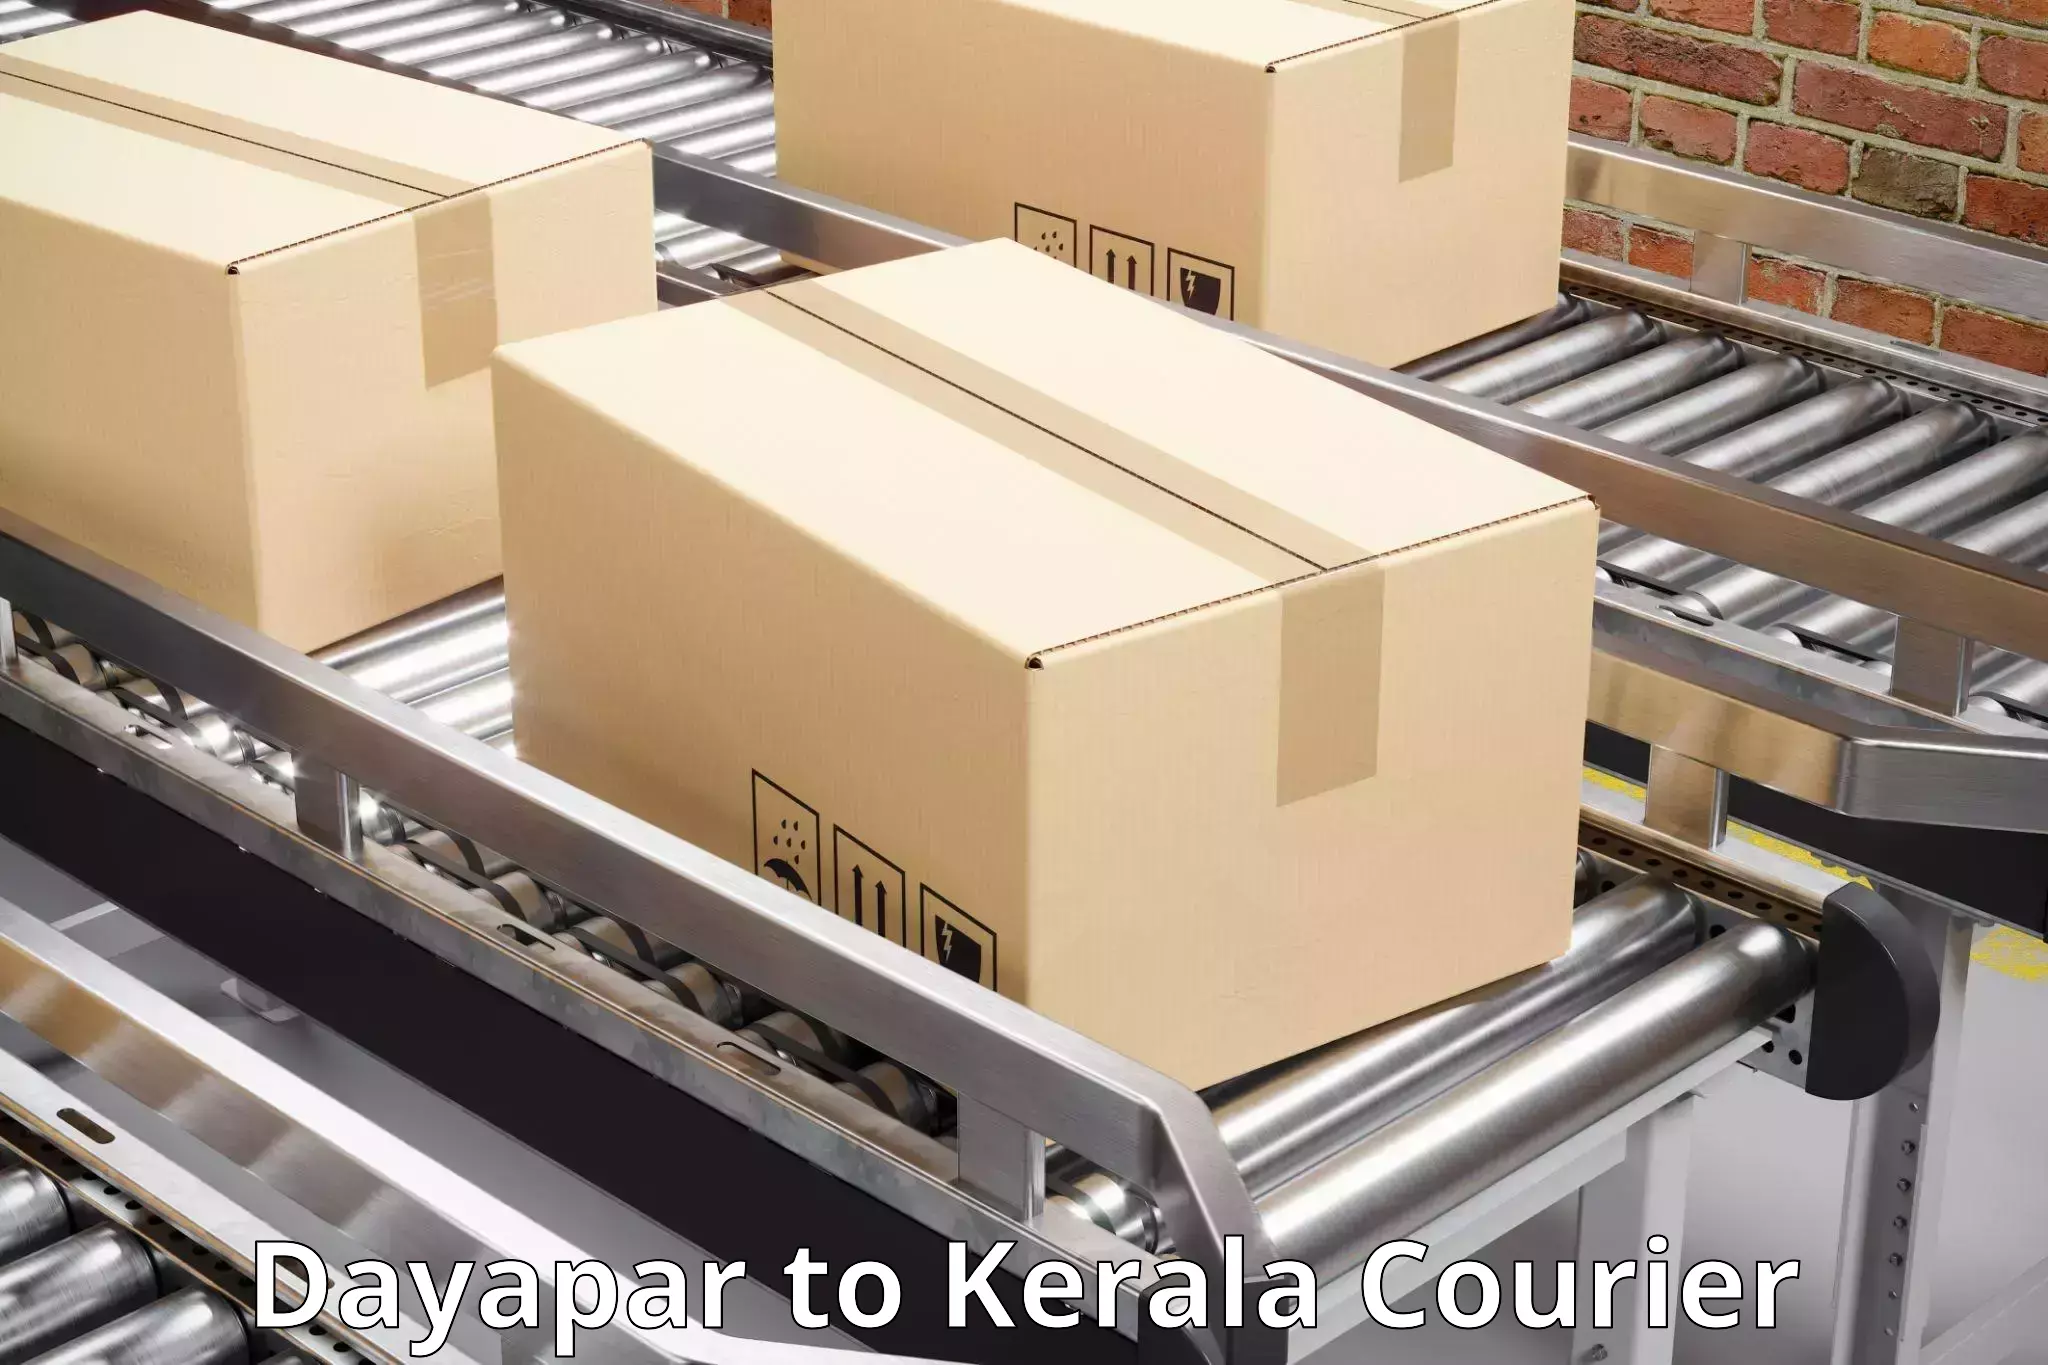 Express package services Dayapar to Mahe